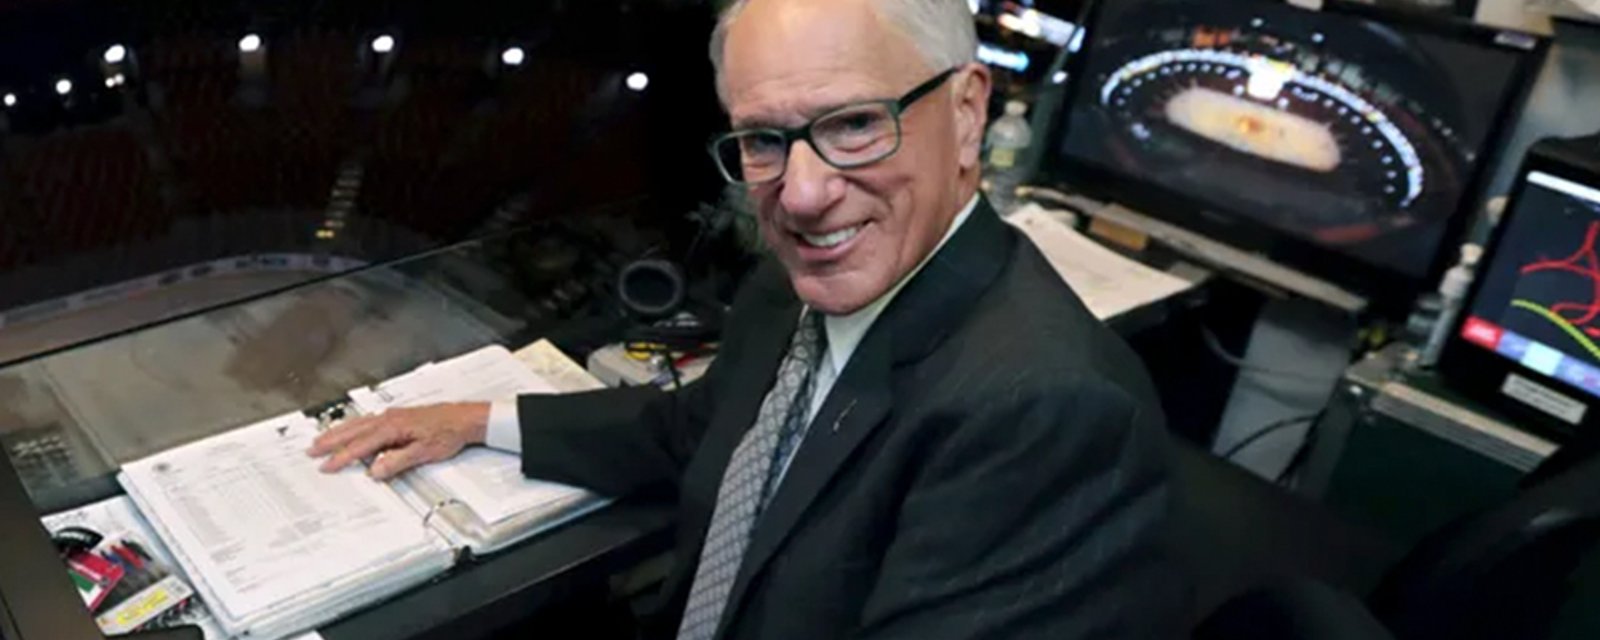 NBC broadcaster Doc Emrick does play-by-play on windshield wiper replacement